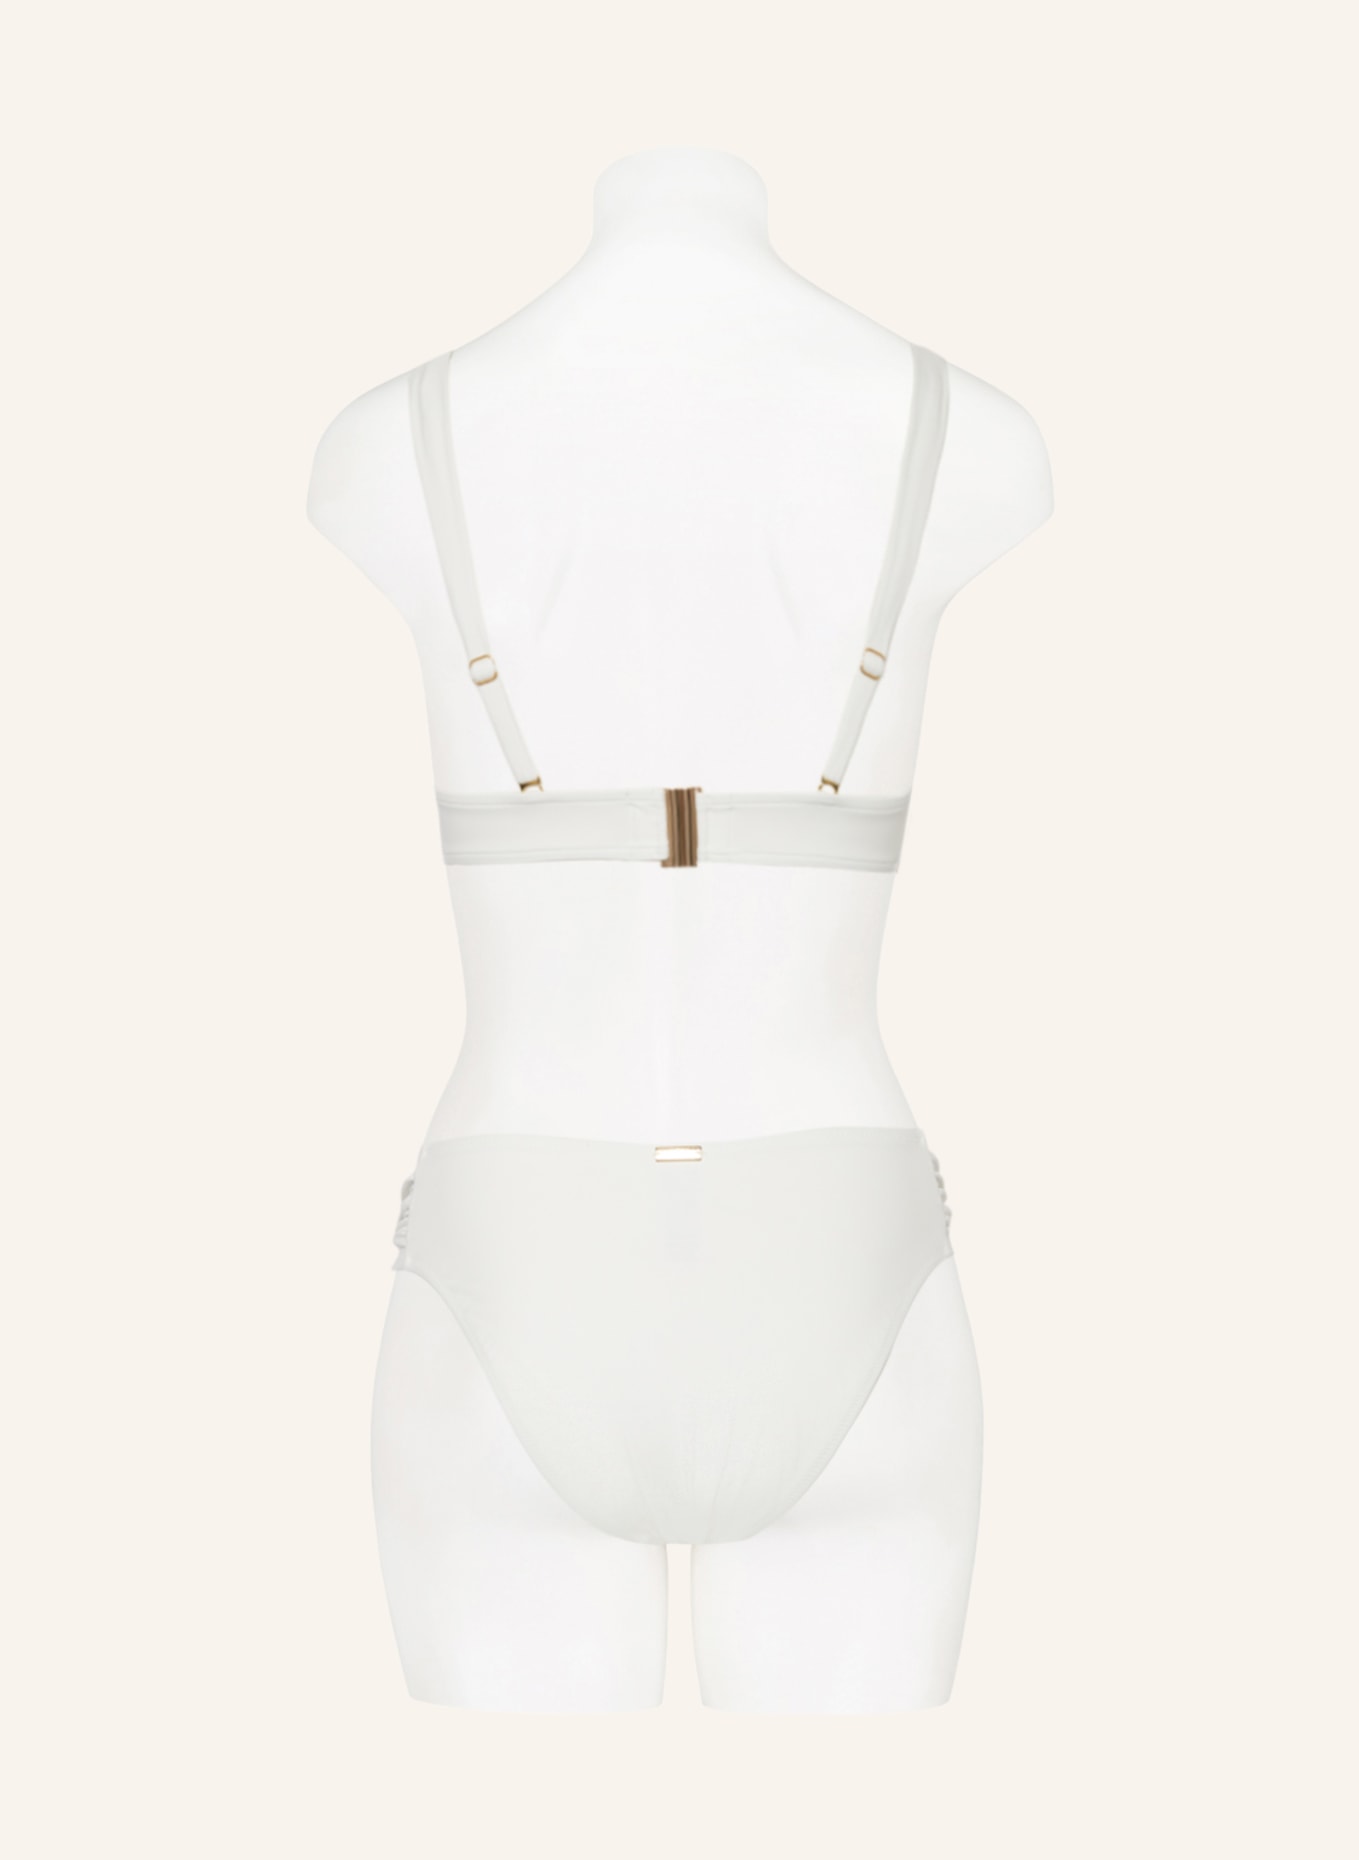 MARYAN MEHLHORN Bralette bikini top THE WHITE COLLECTION, Color: WHITE (Image 3)